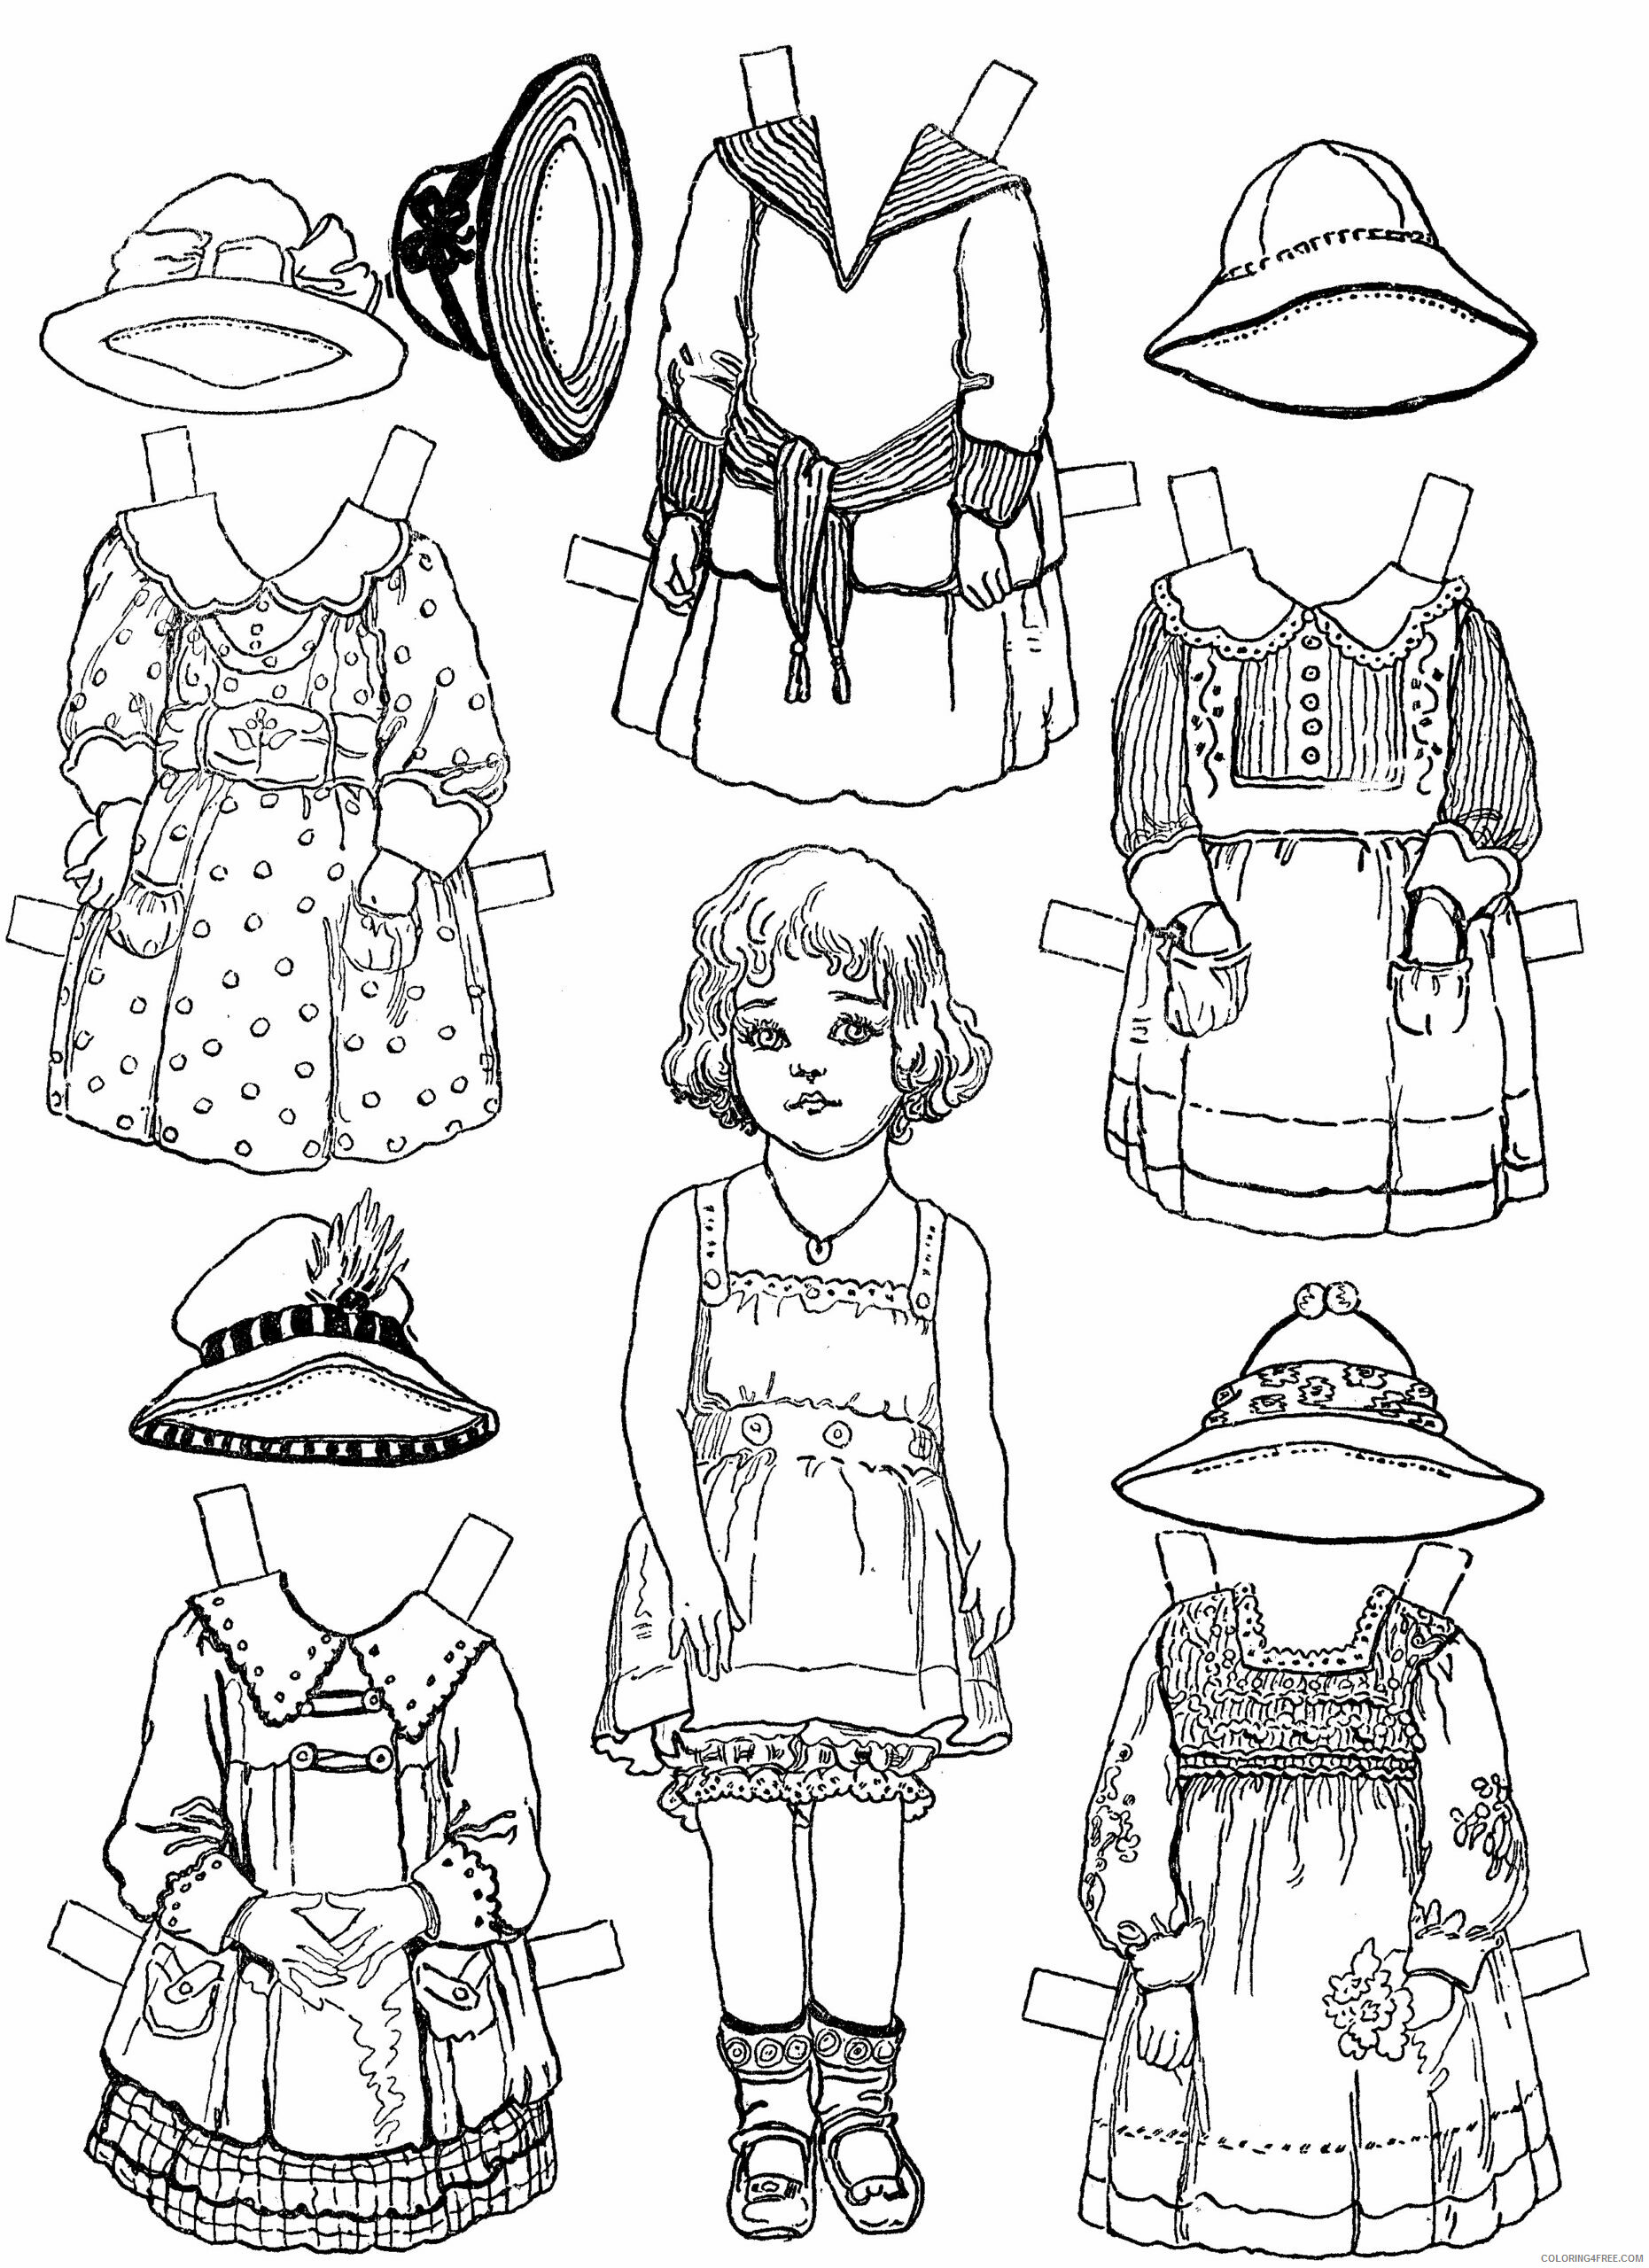 Paper Dolls Coloring Pages for Girls Paper Doll For Kids Printable 2021 0959 Coloring4free